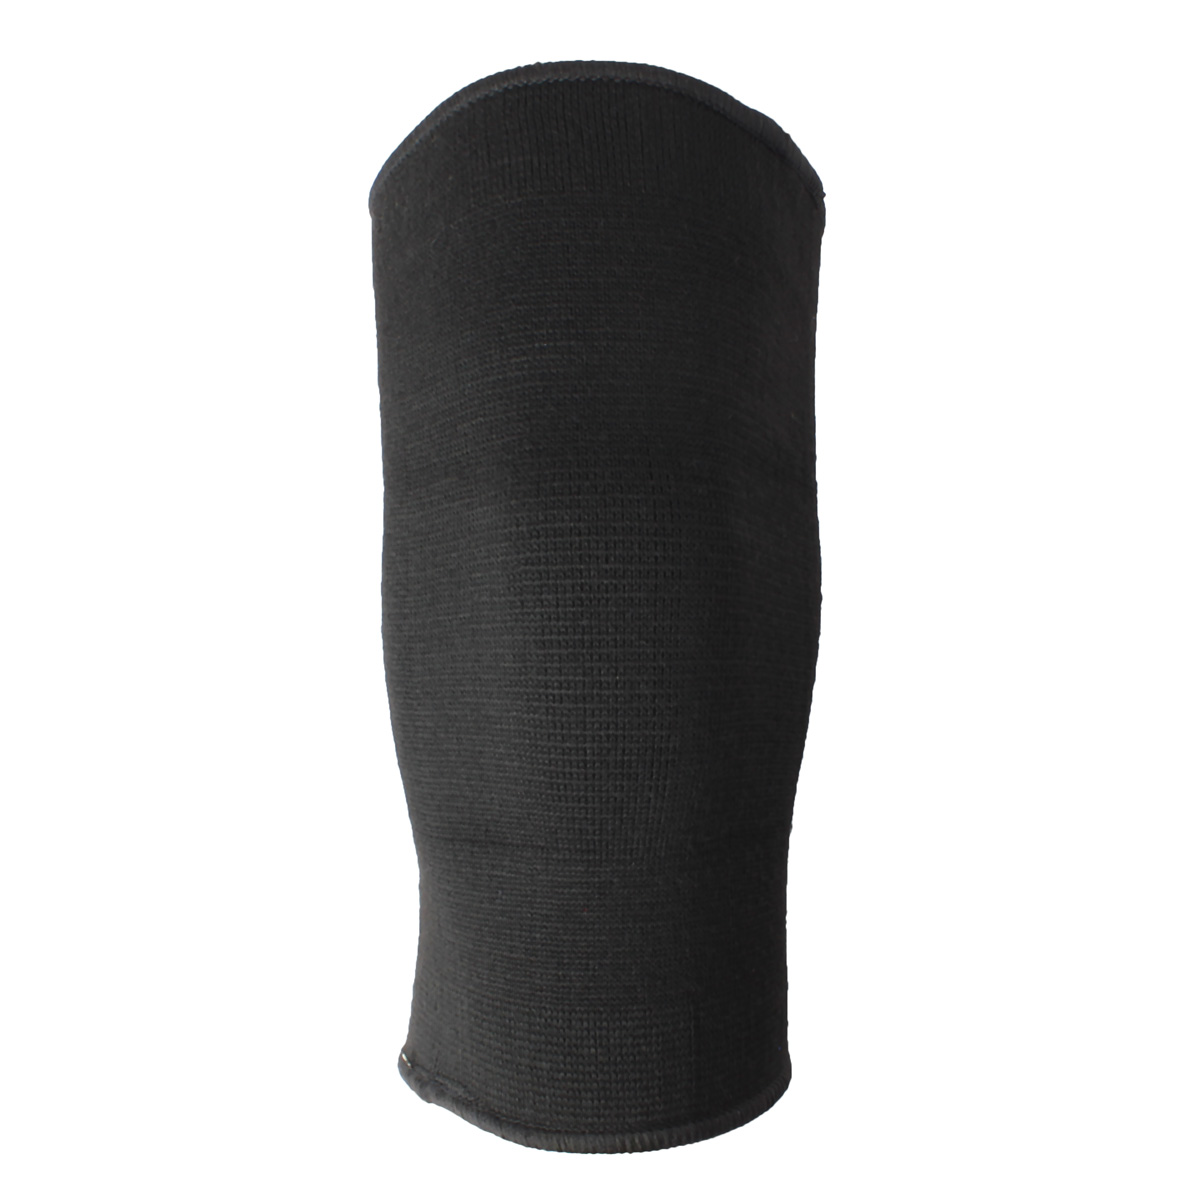 Thigh-Sleeve-Calf-Leg-Compression-Hamstring-Groin-Support-Brace-Protective-984505